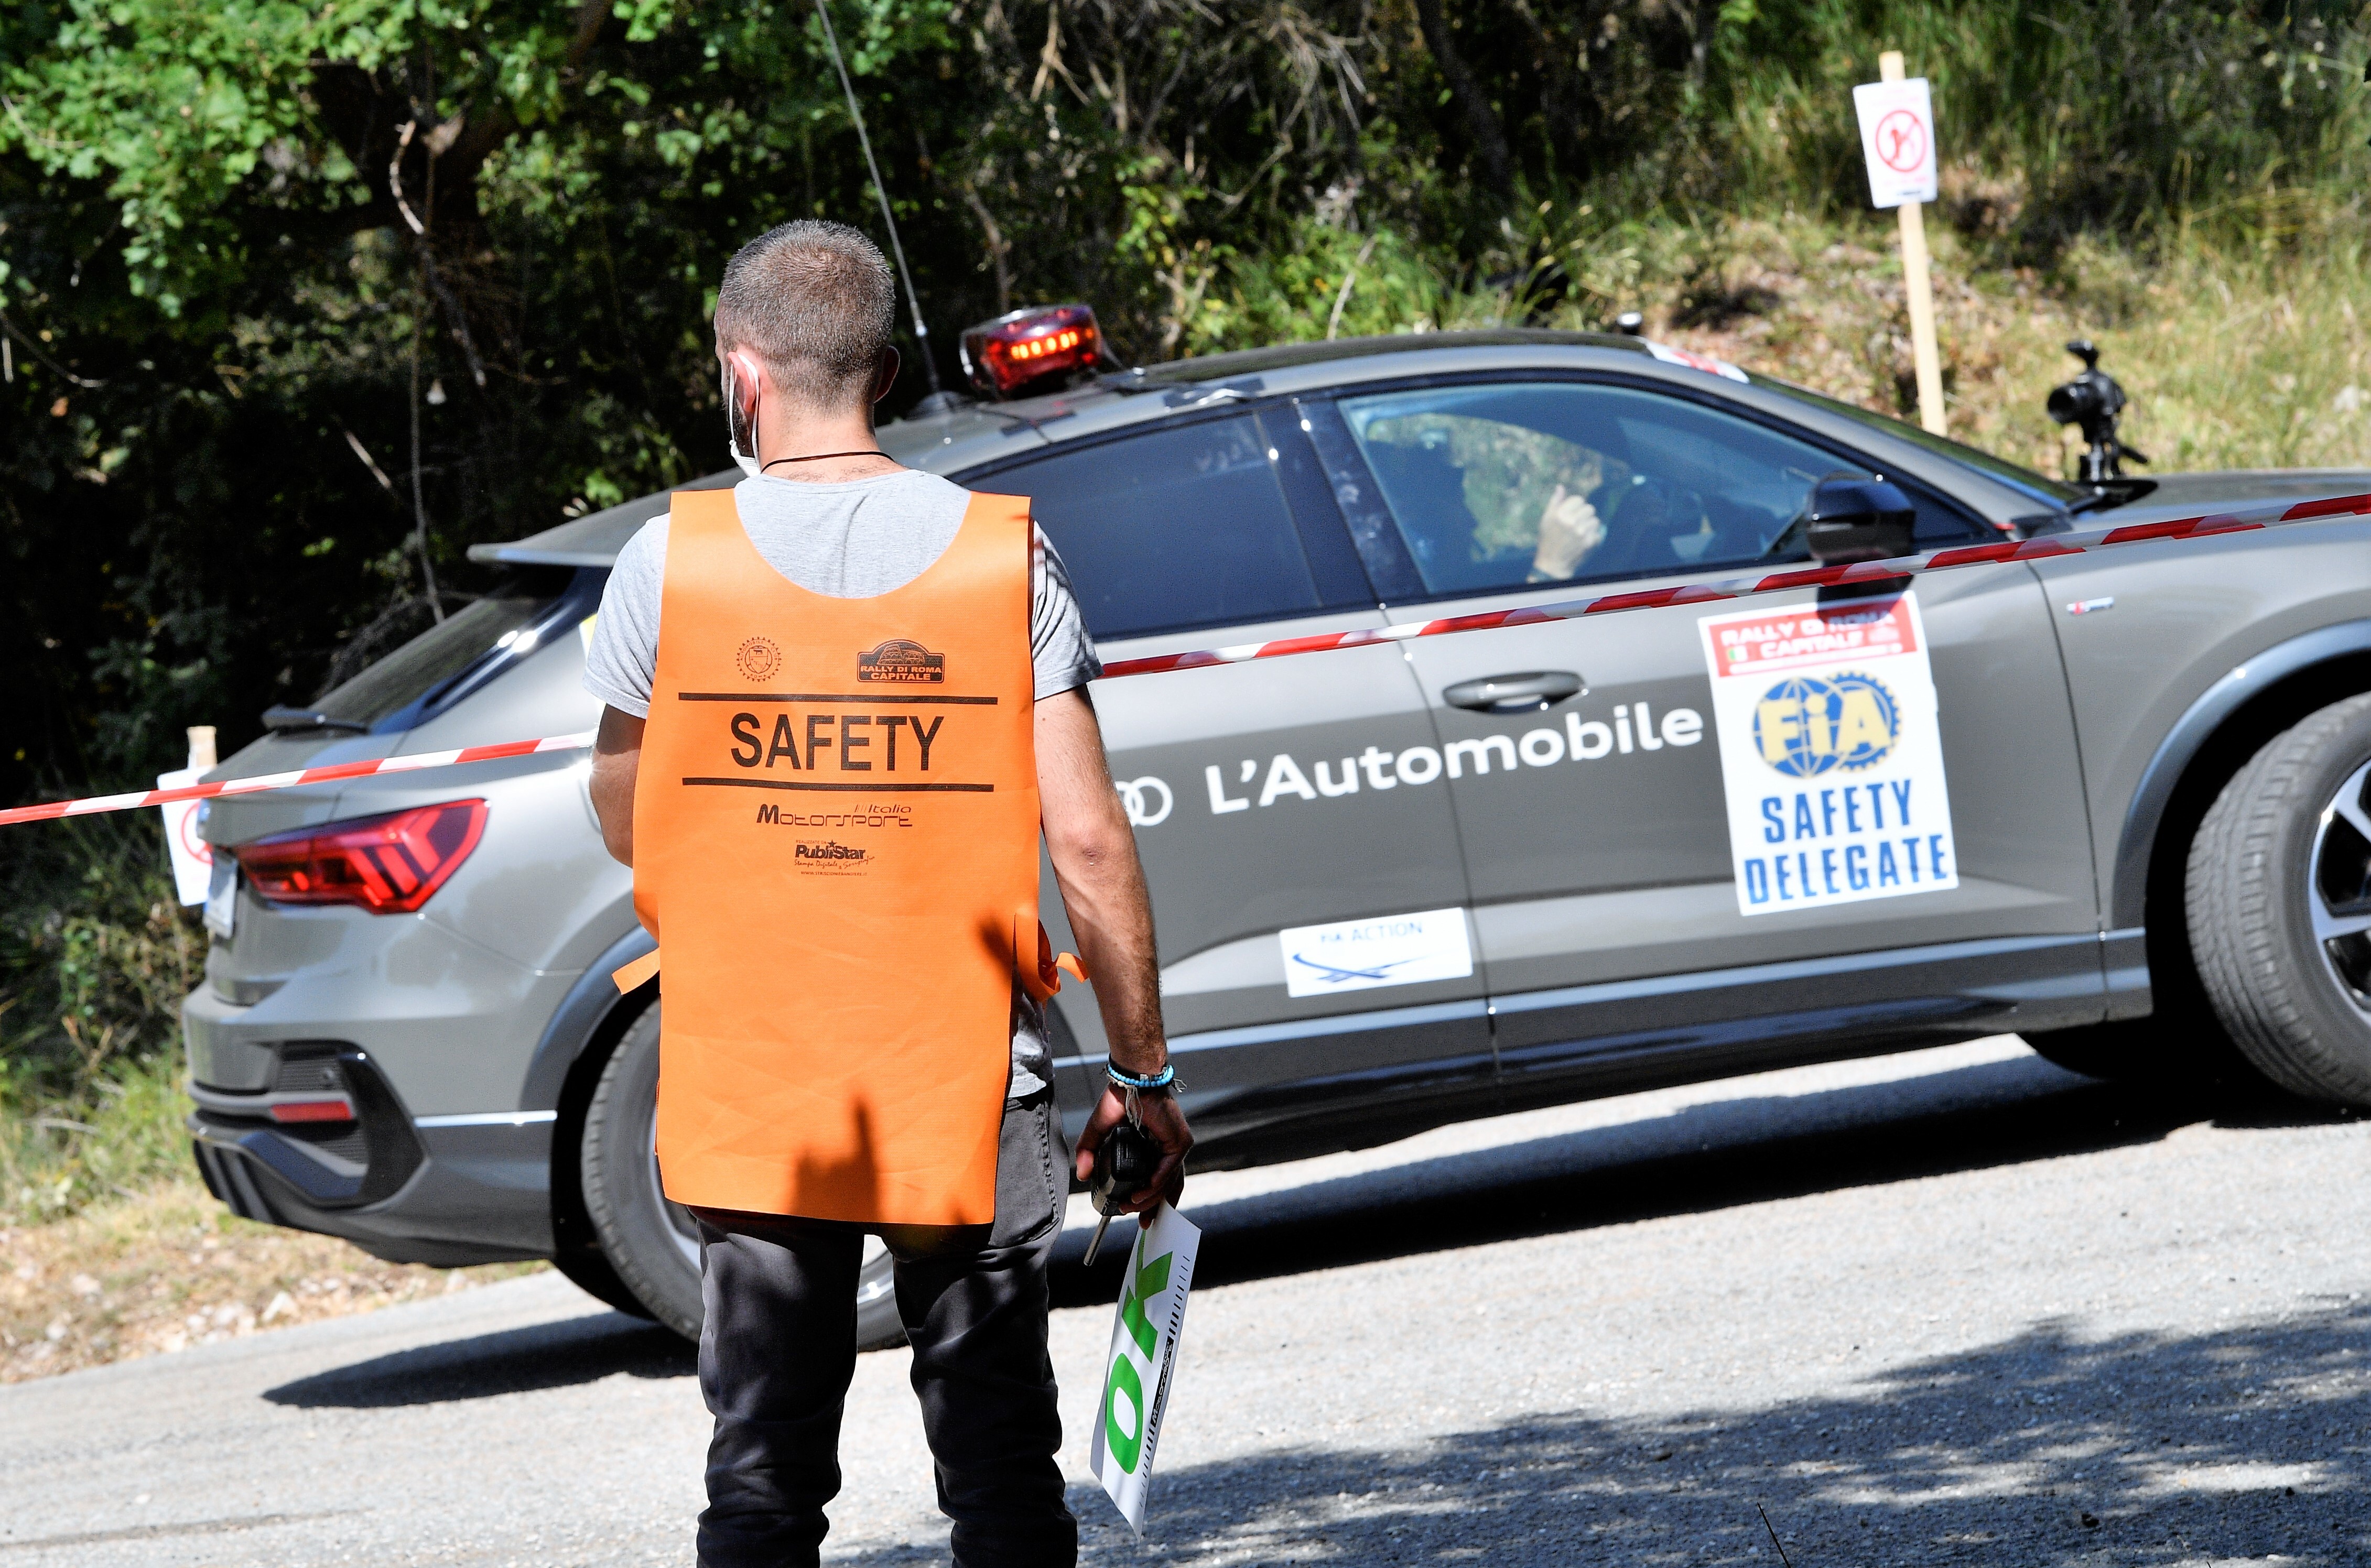 Safety as a priority at the Rally di Roma Capitale thanks to the standards introduced by the WRC Promoter in the 2022 European Rally Championship